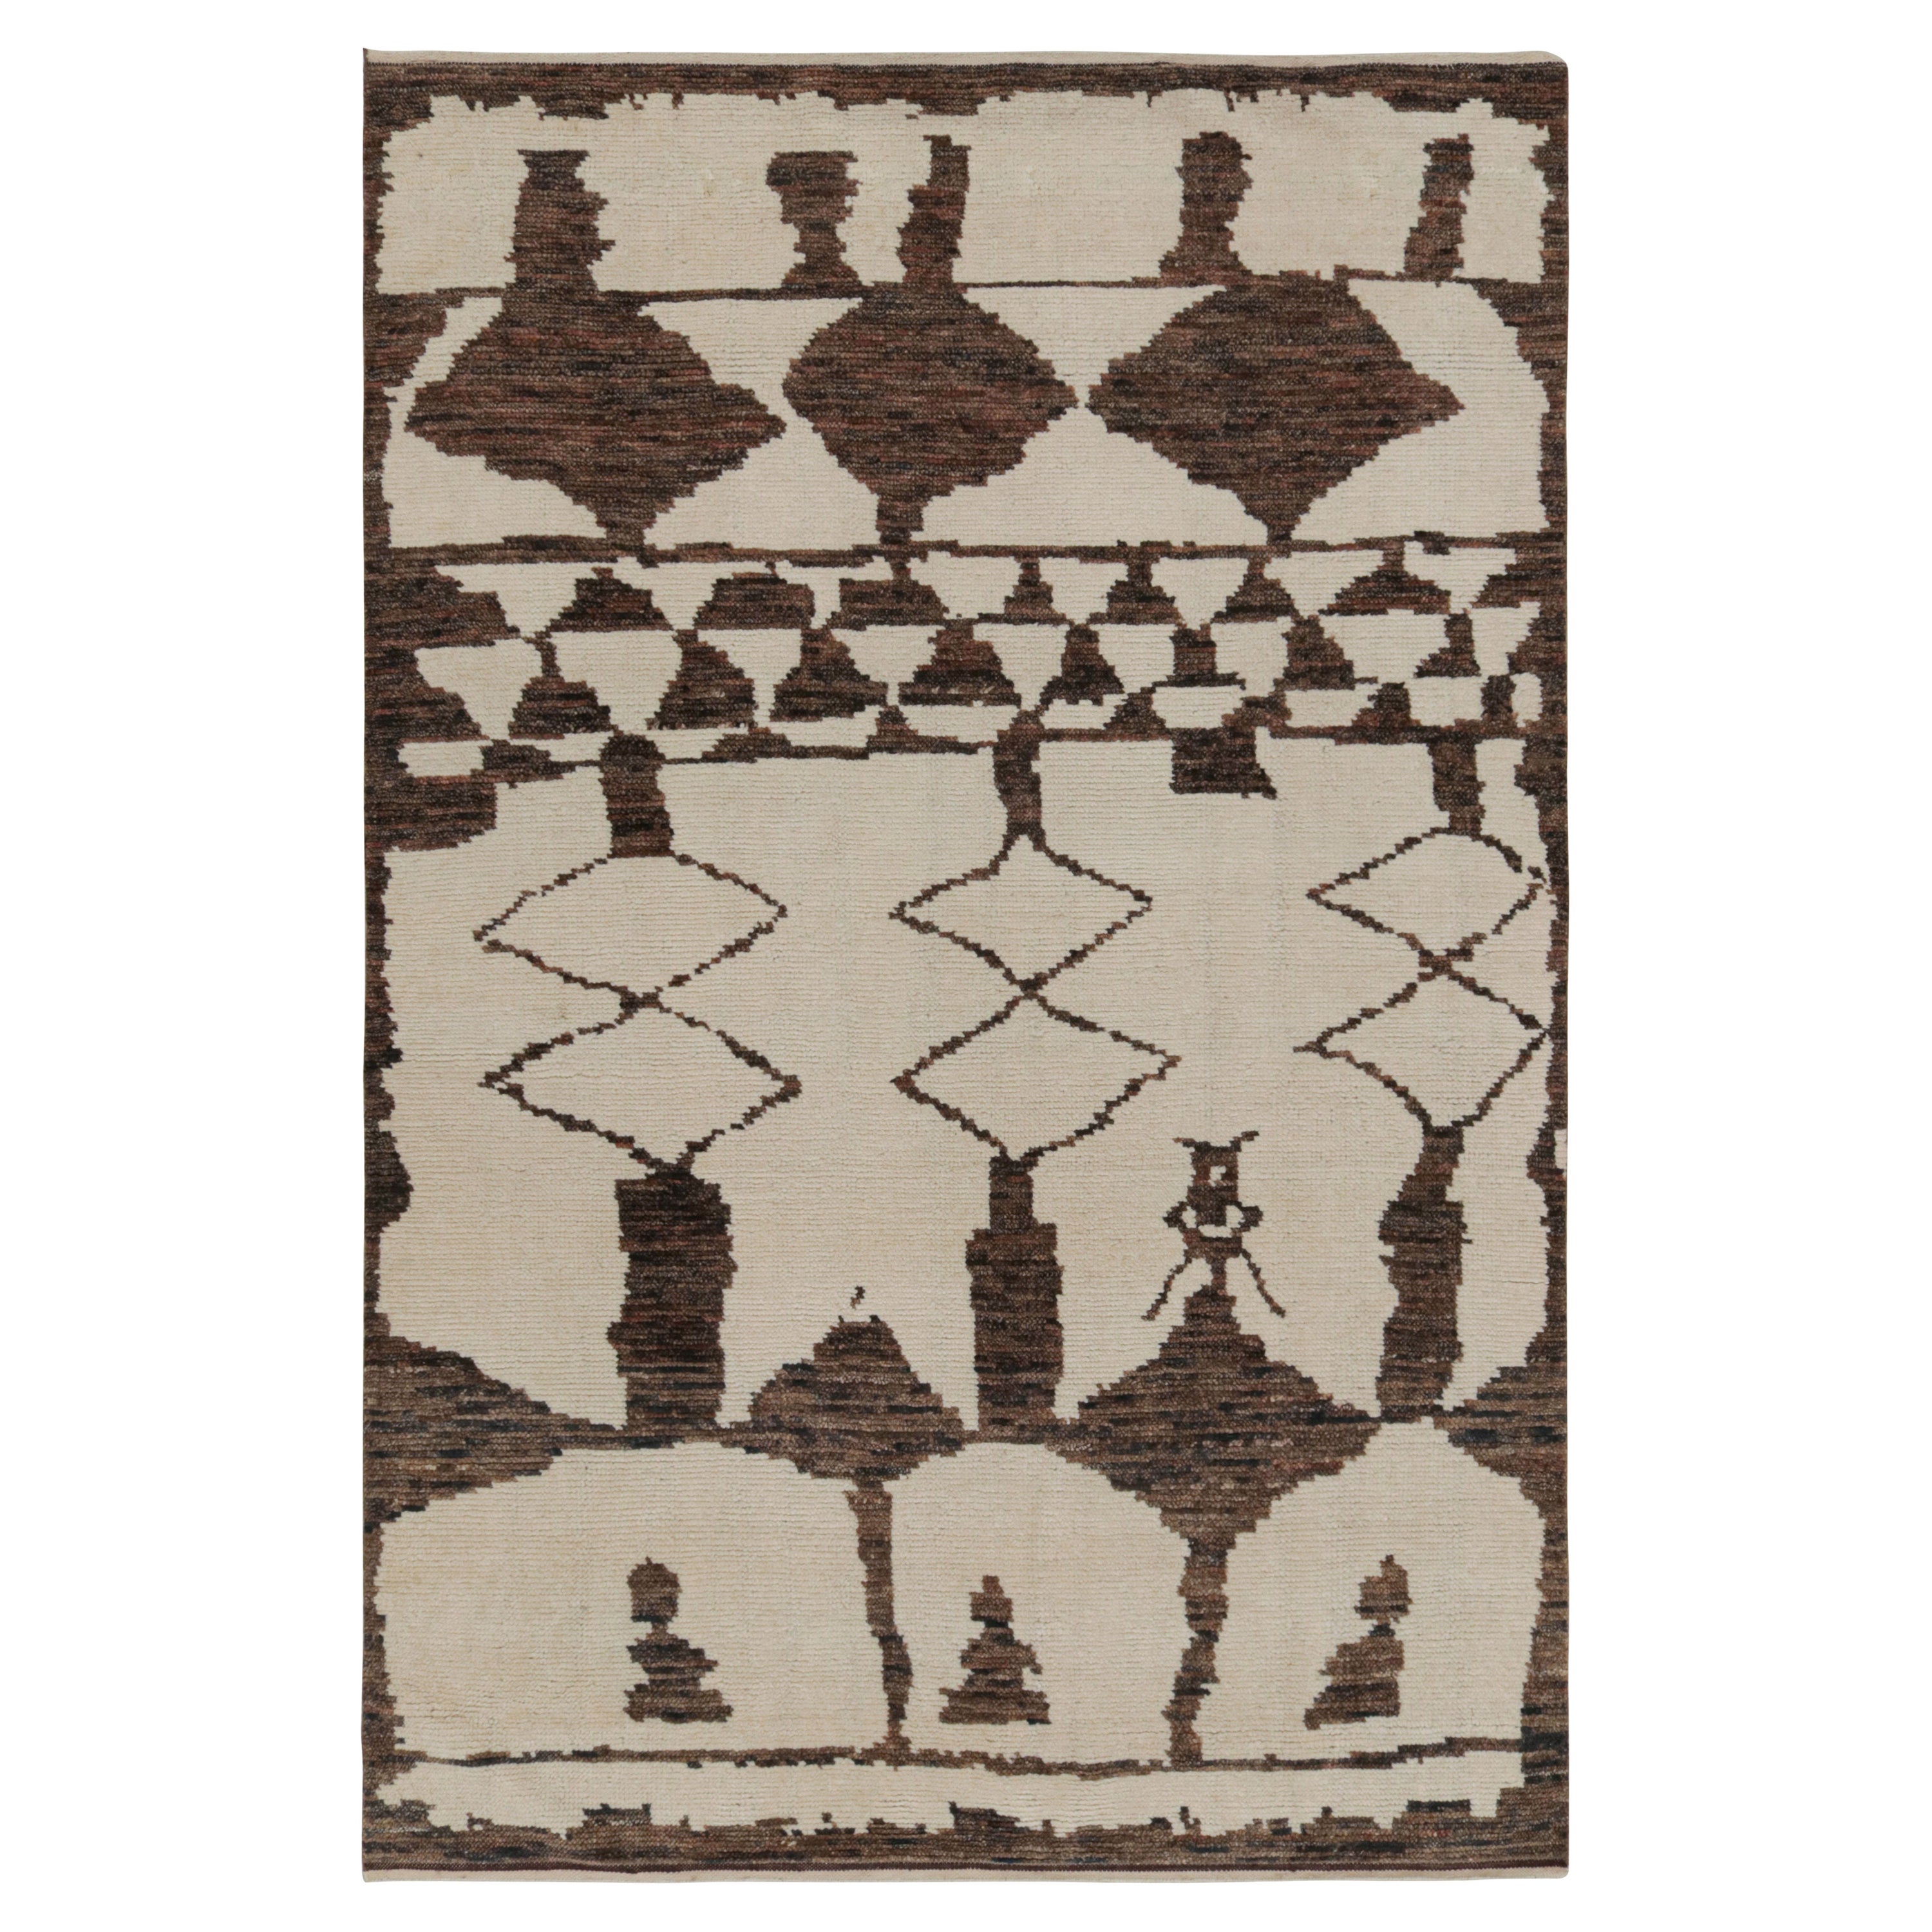 Rug & Kilim’s Contemporary Moroccan Style Geometric Rug in Beige-Brown